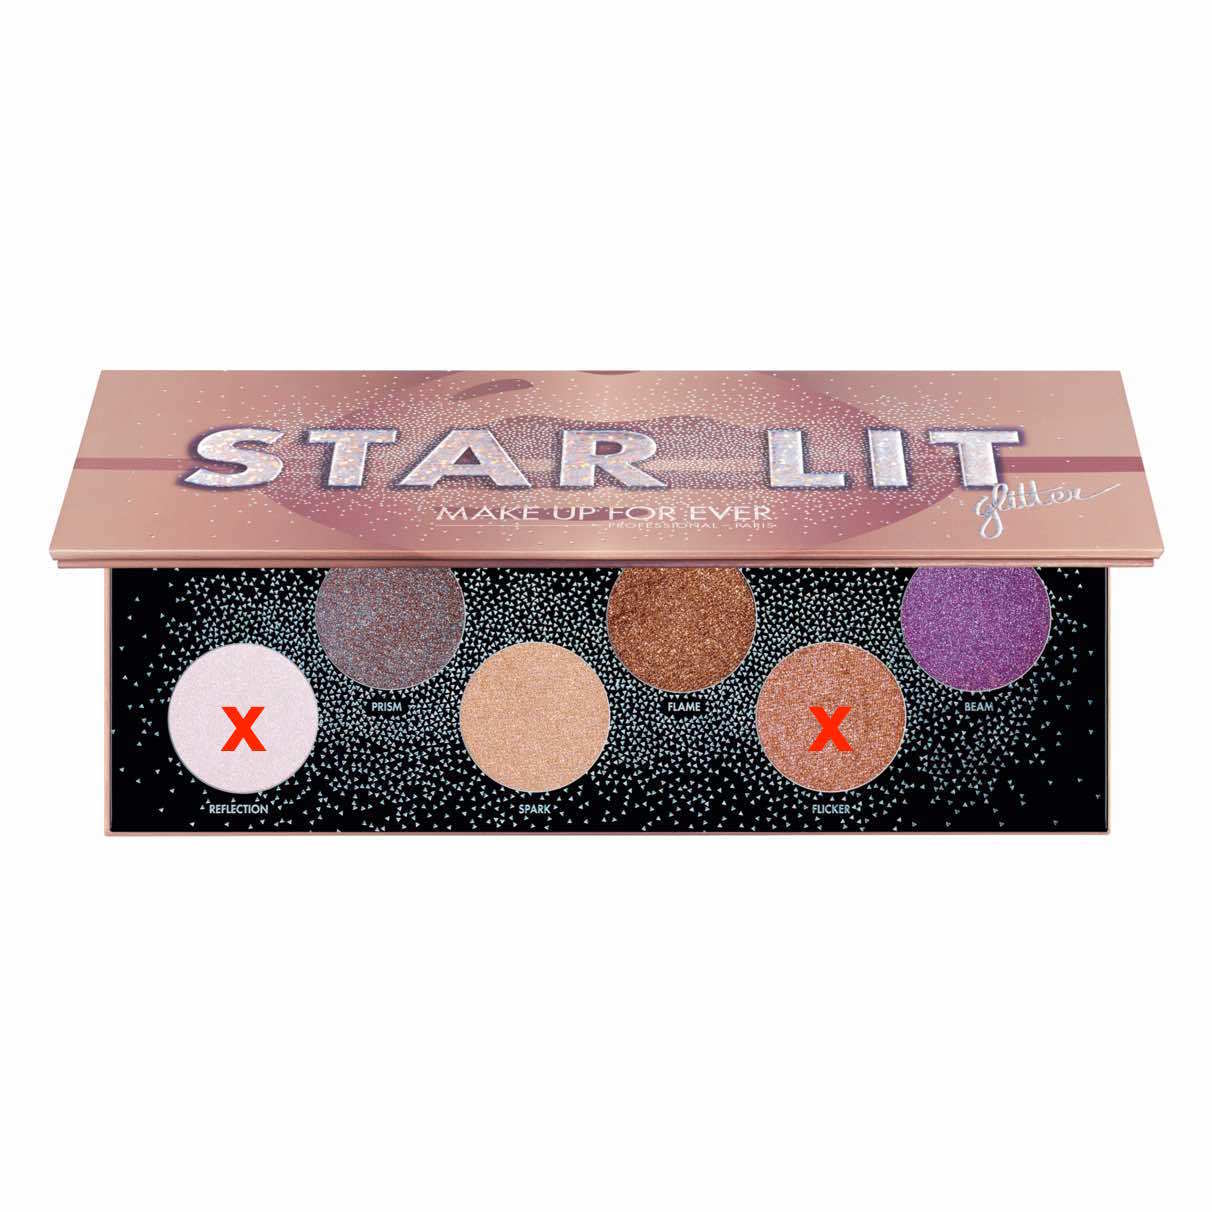 Makeup Forever Star Lit Glitter Palette (without reflection and flicker)